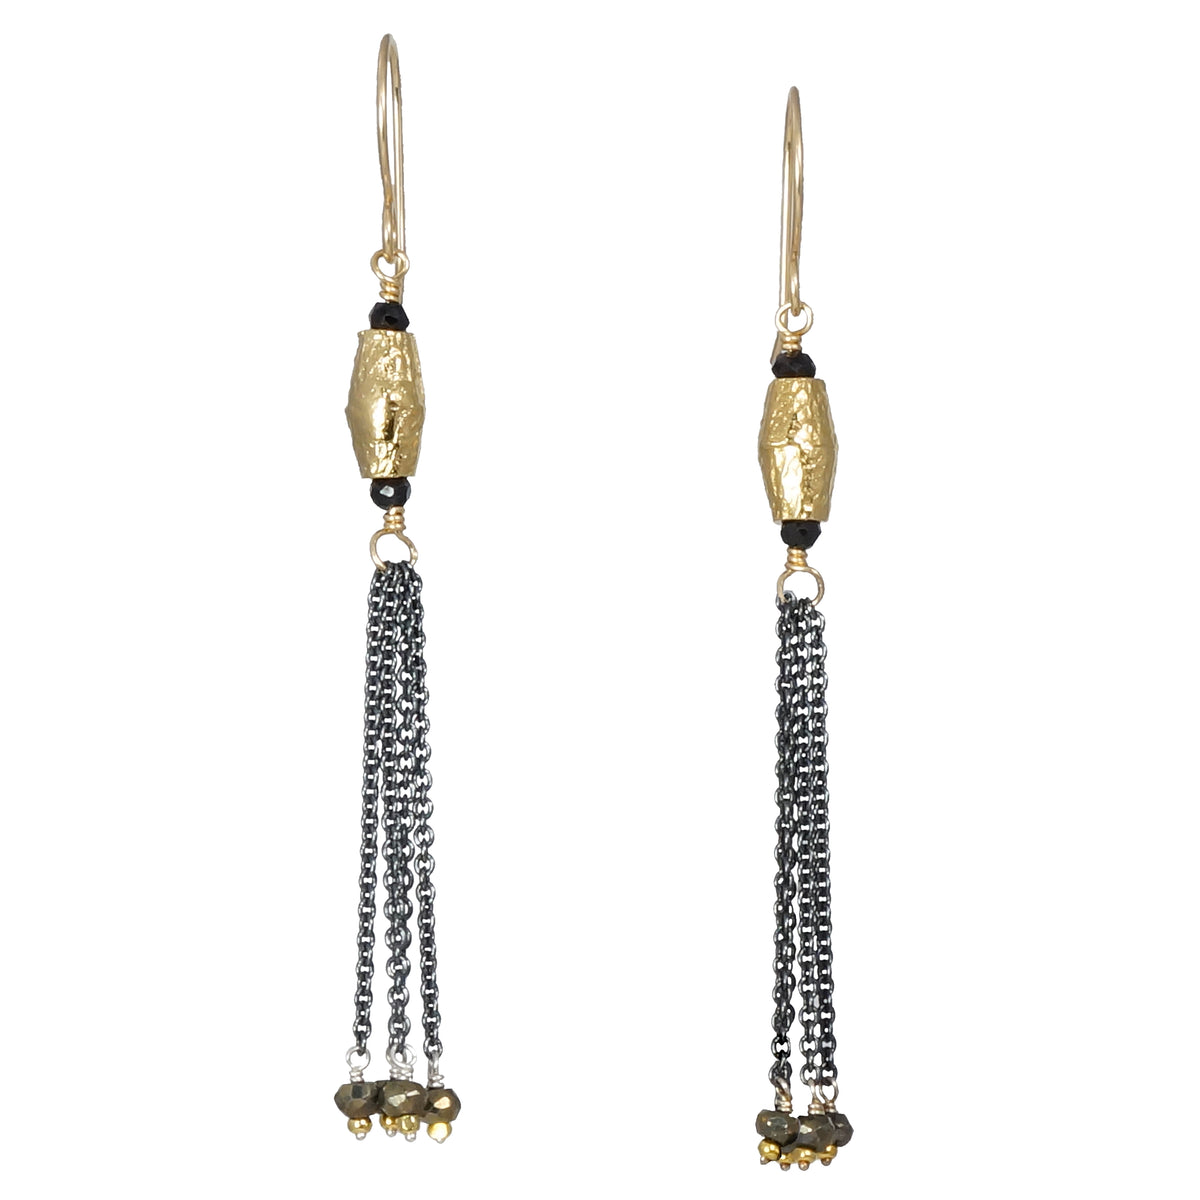 Mixed Metal Earrings with Tassels - Q Evon Fine Jewelry Collections